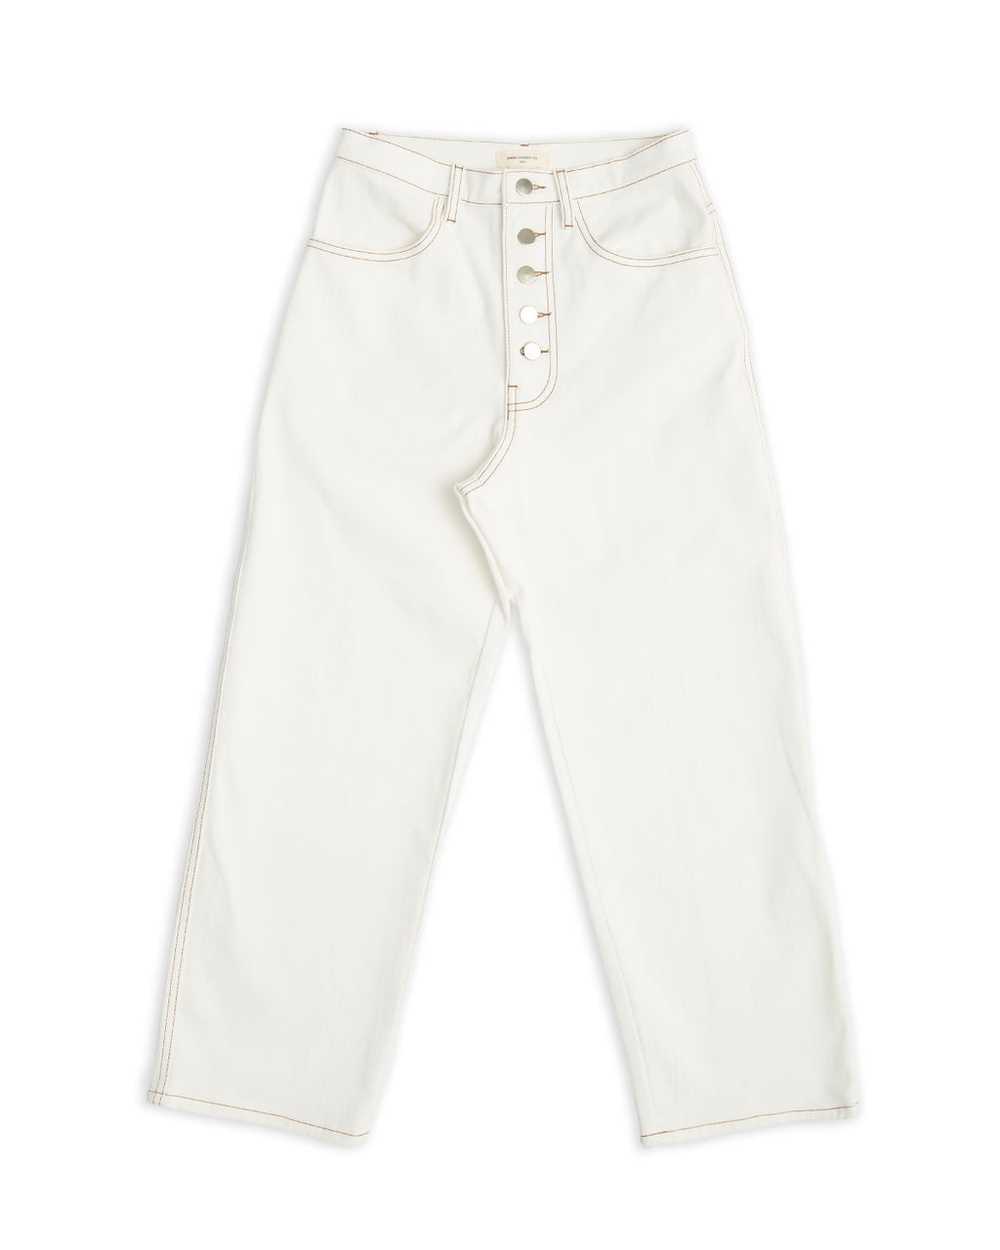 James Street Co. MILL PANT - image 6